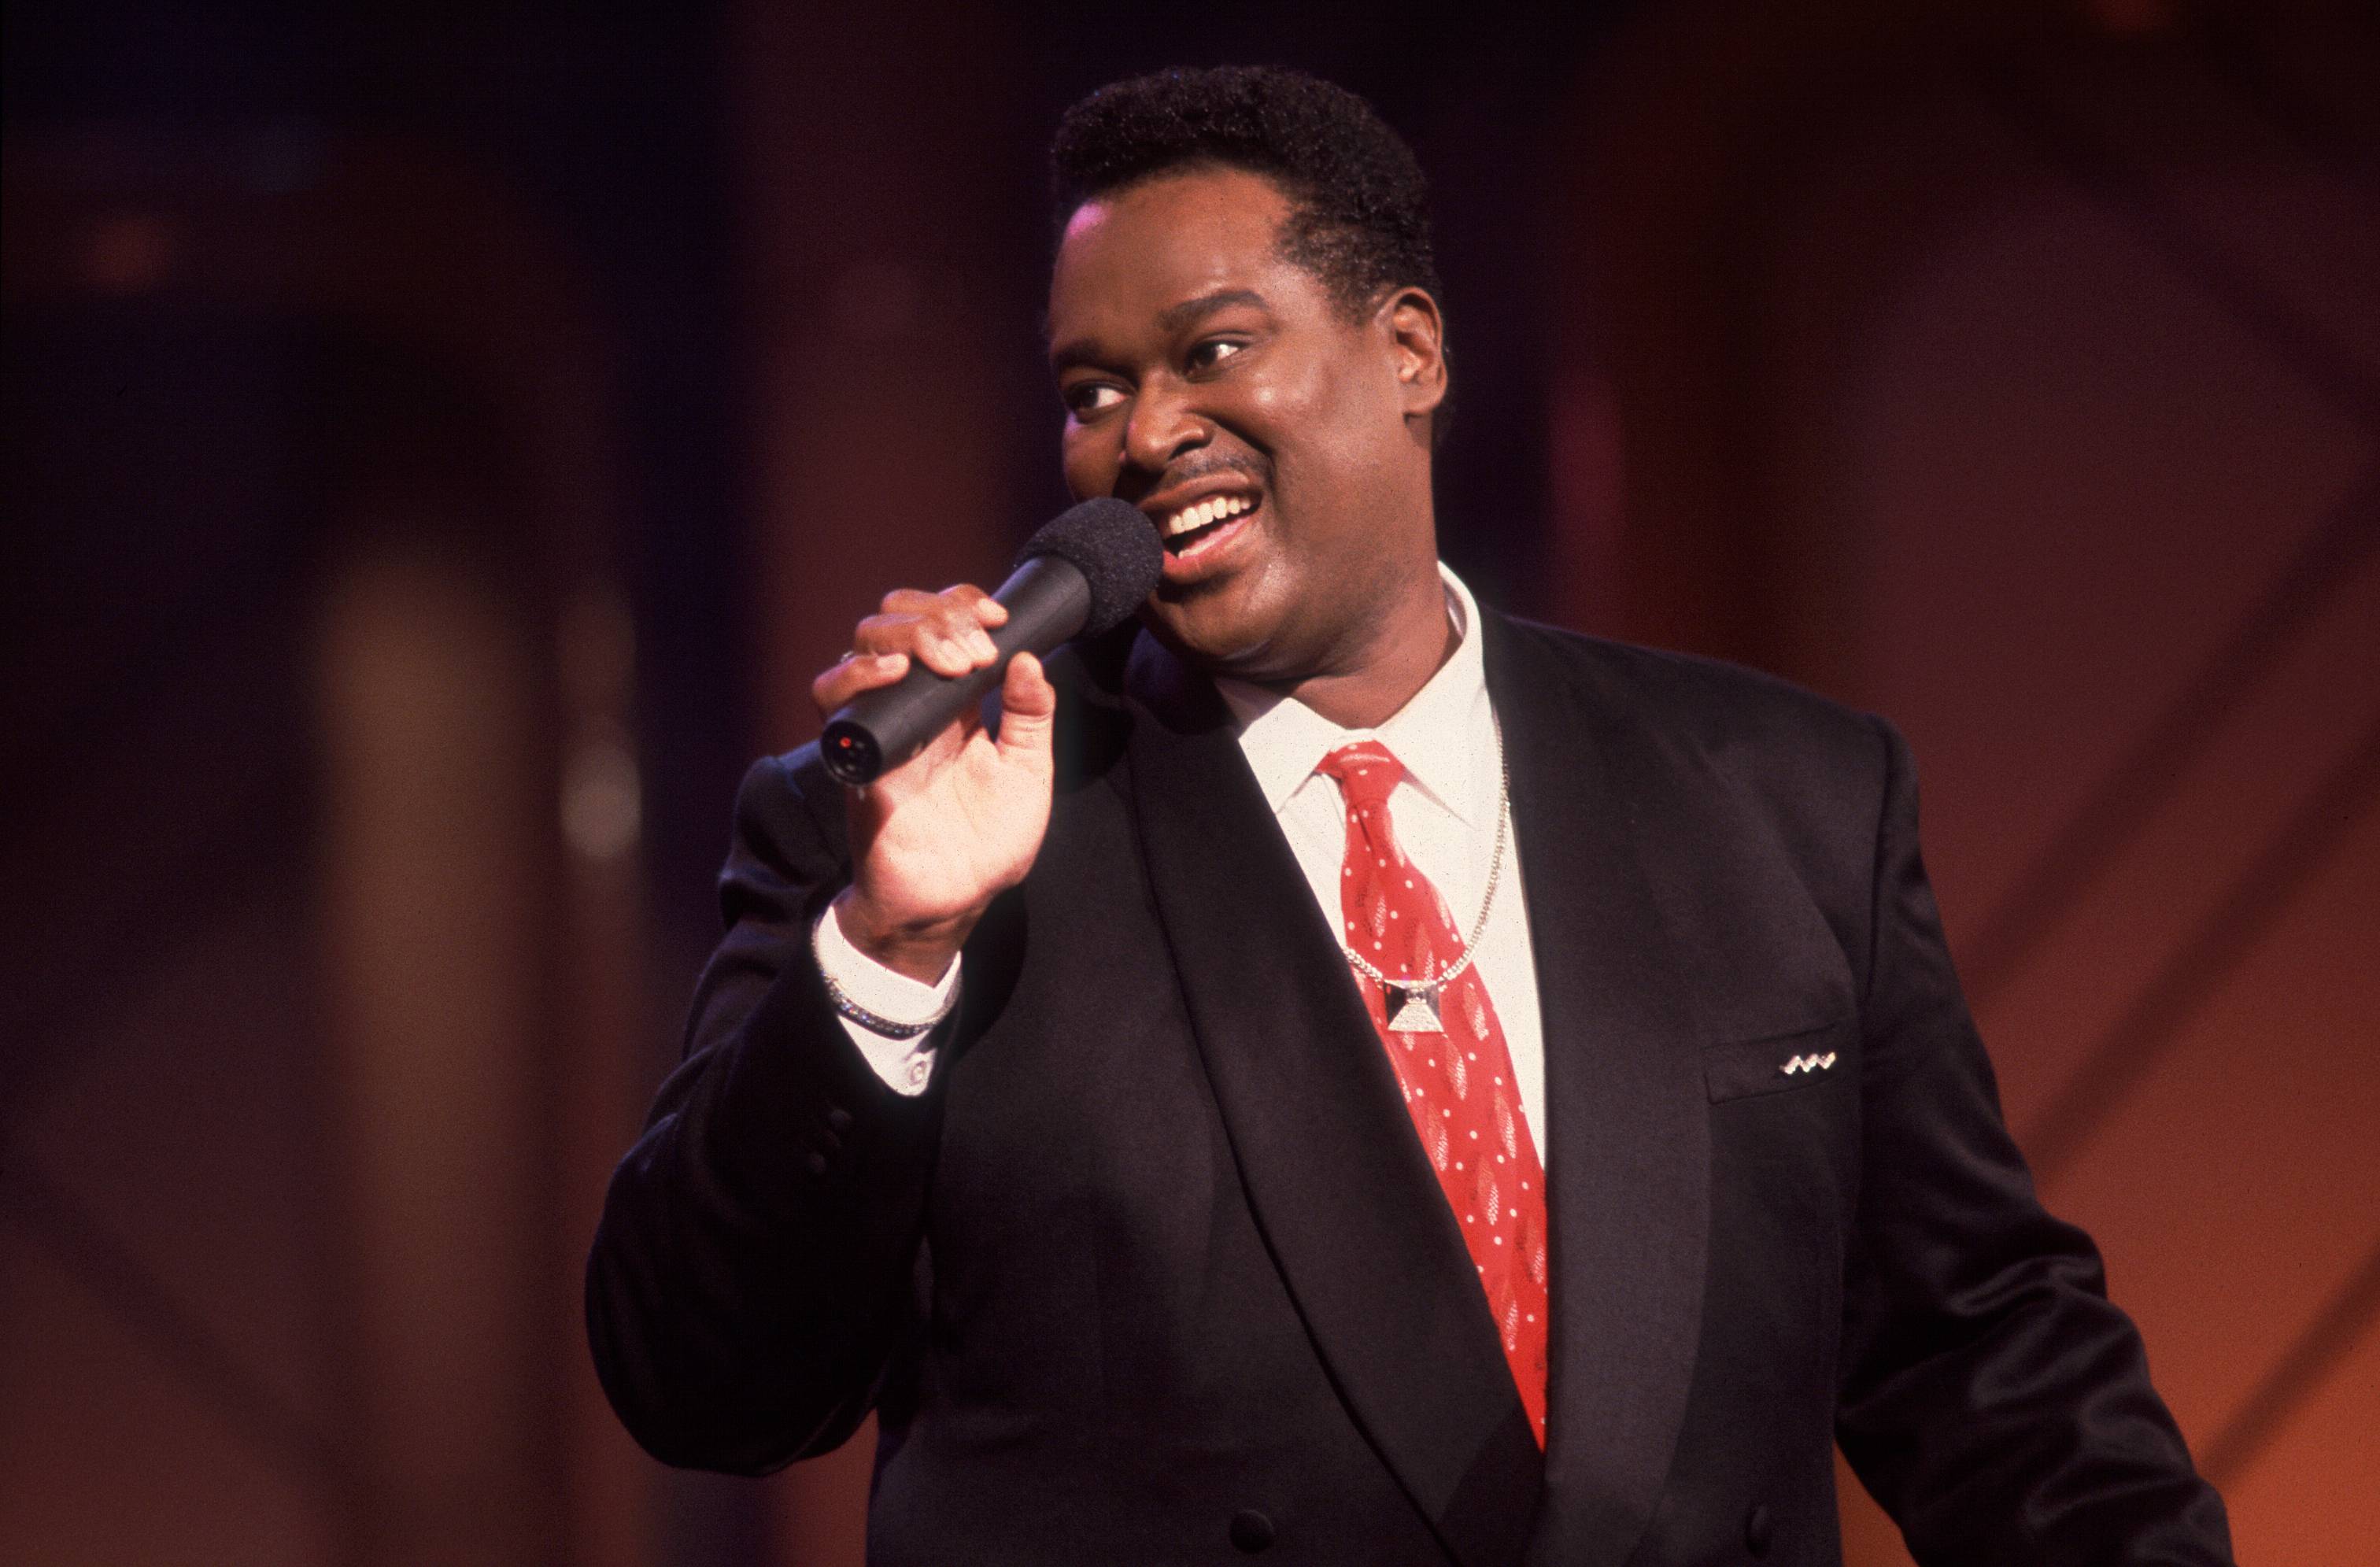 Luther Vandross on the Oprah Winfrey Show on June 28, 1991 in Chicago, Illinois. (Photo by Paul Natkin/Getty Images)